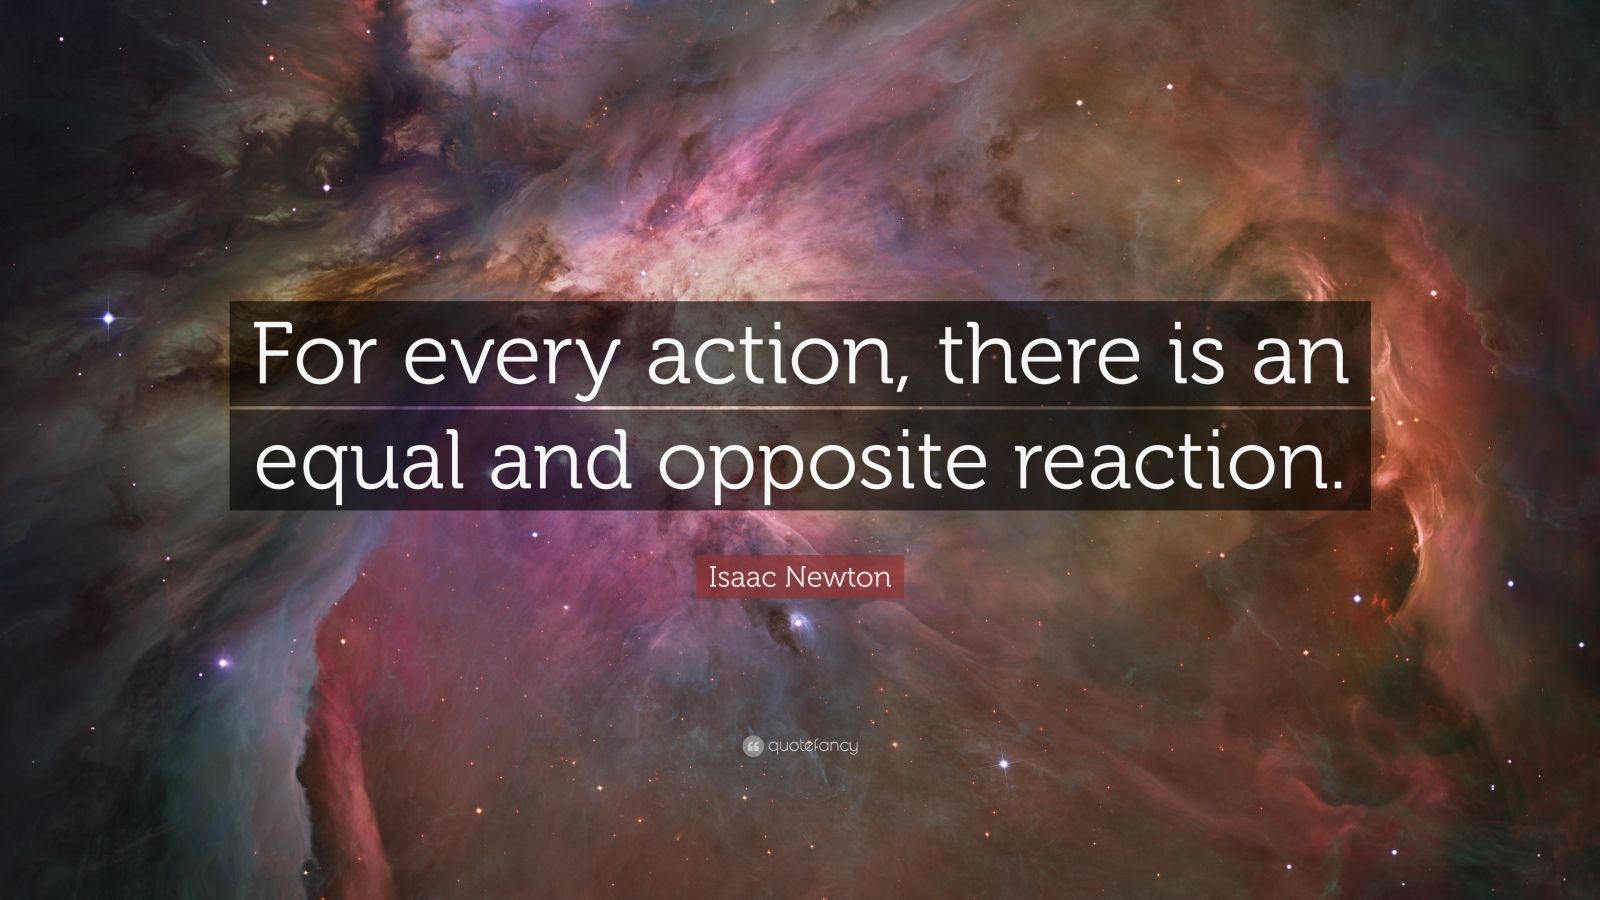 Isaac Newton Quote: “For every action, there is an equal and opposite